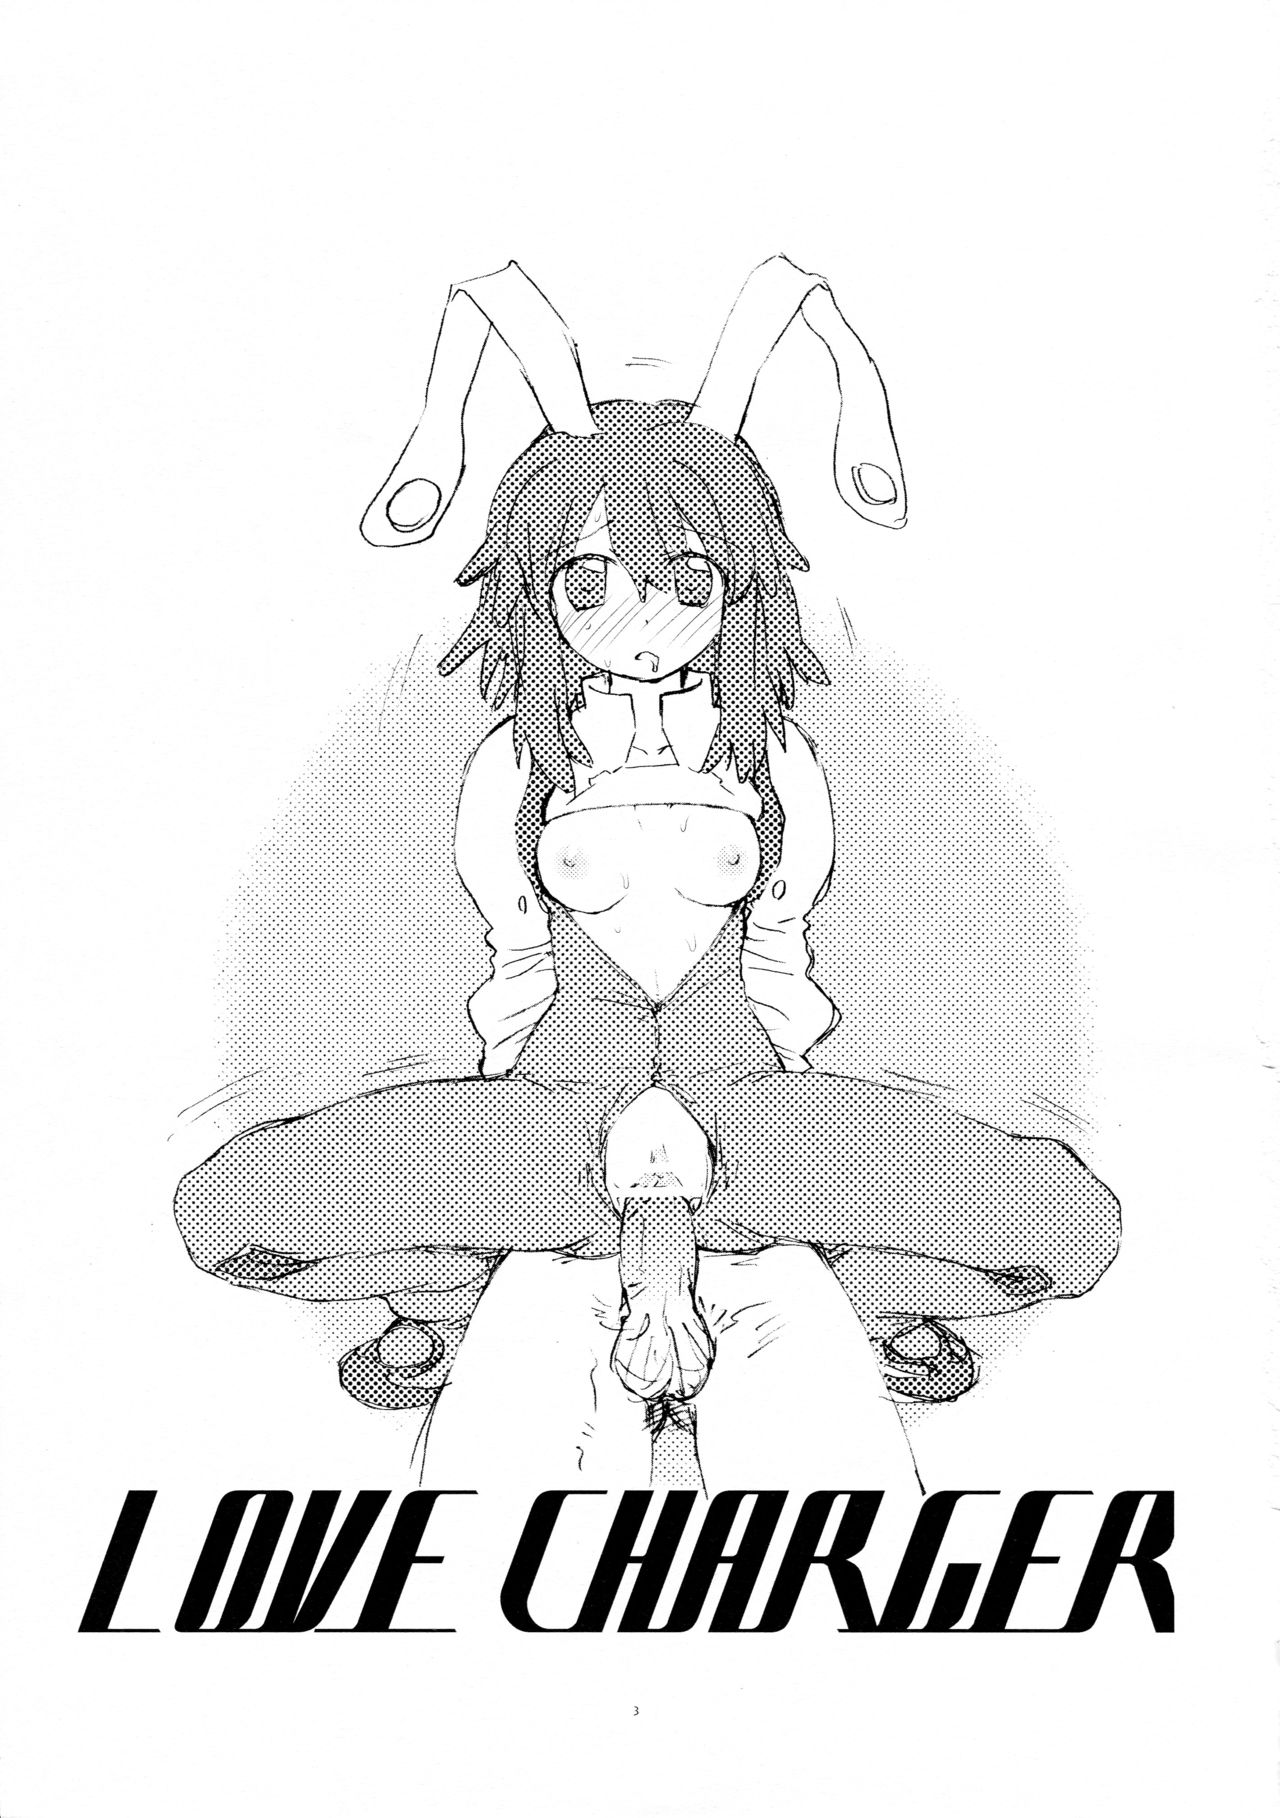 (C74) [春画部 (環々唯)] LOVE CHARGER (ファイト一発! 充電ちゃん!!)